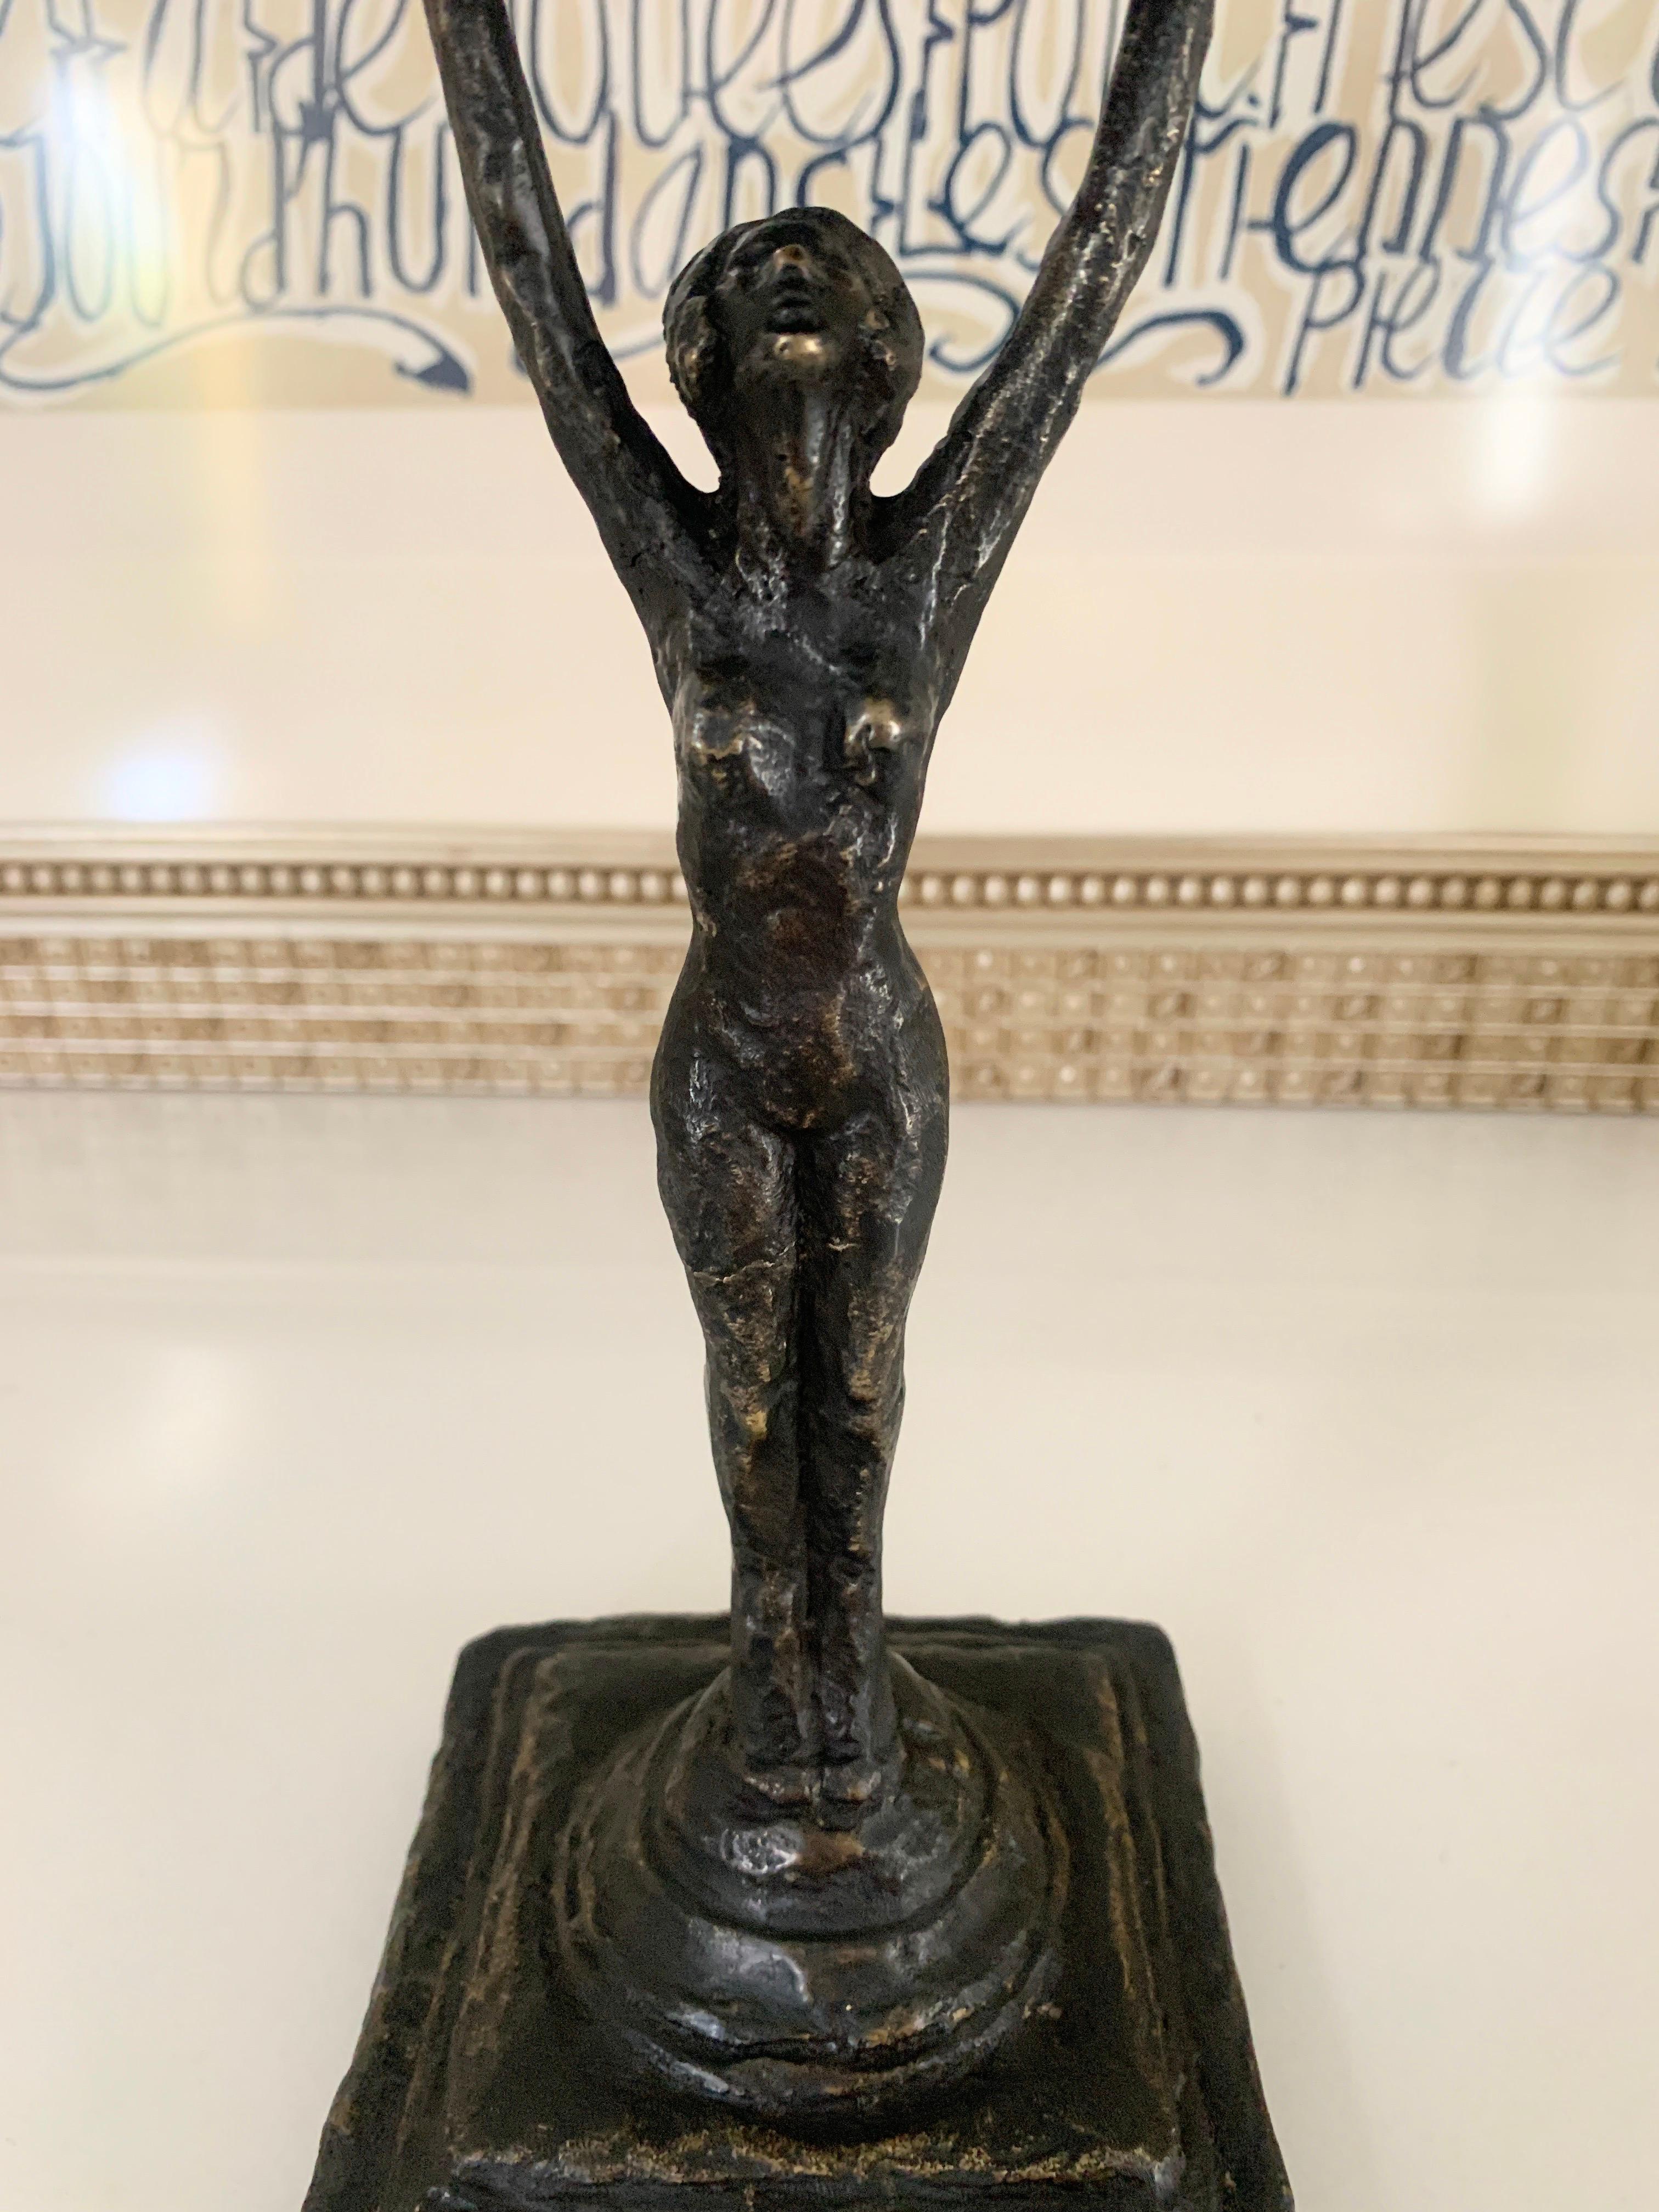 A wonderful carved bronze figure holding a cup above her head - a stand alone sculpture for any room. Be creative and use the piece on a desk or table holding anything from Appetizers to business cards. The piece has a deep patination and is of good